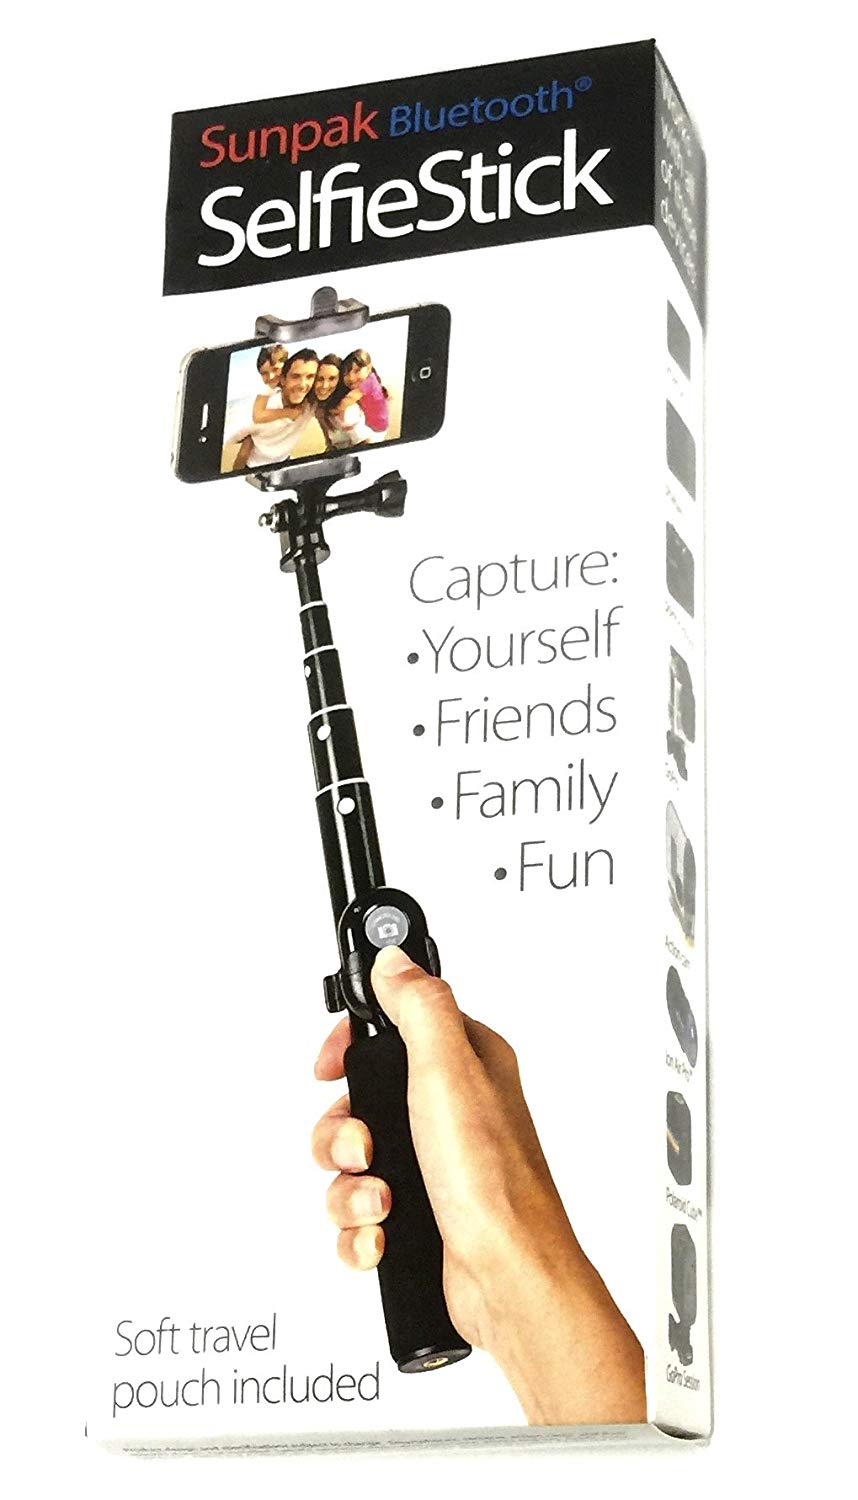 Thumbnail of Selfie Stick with Bluetooth.